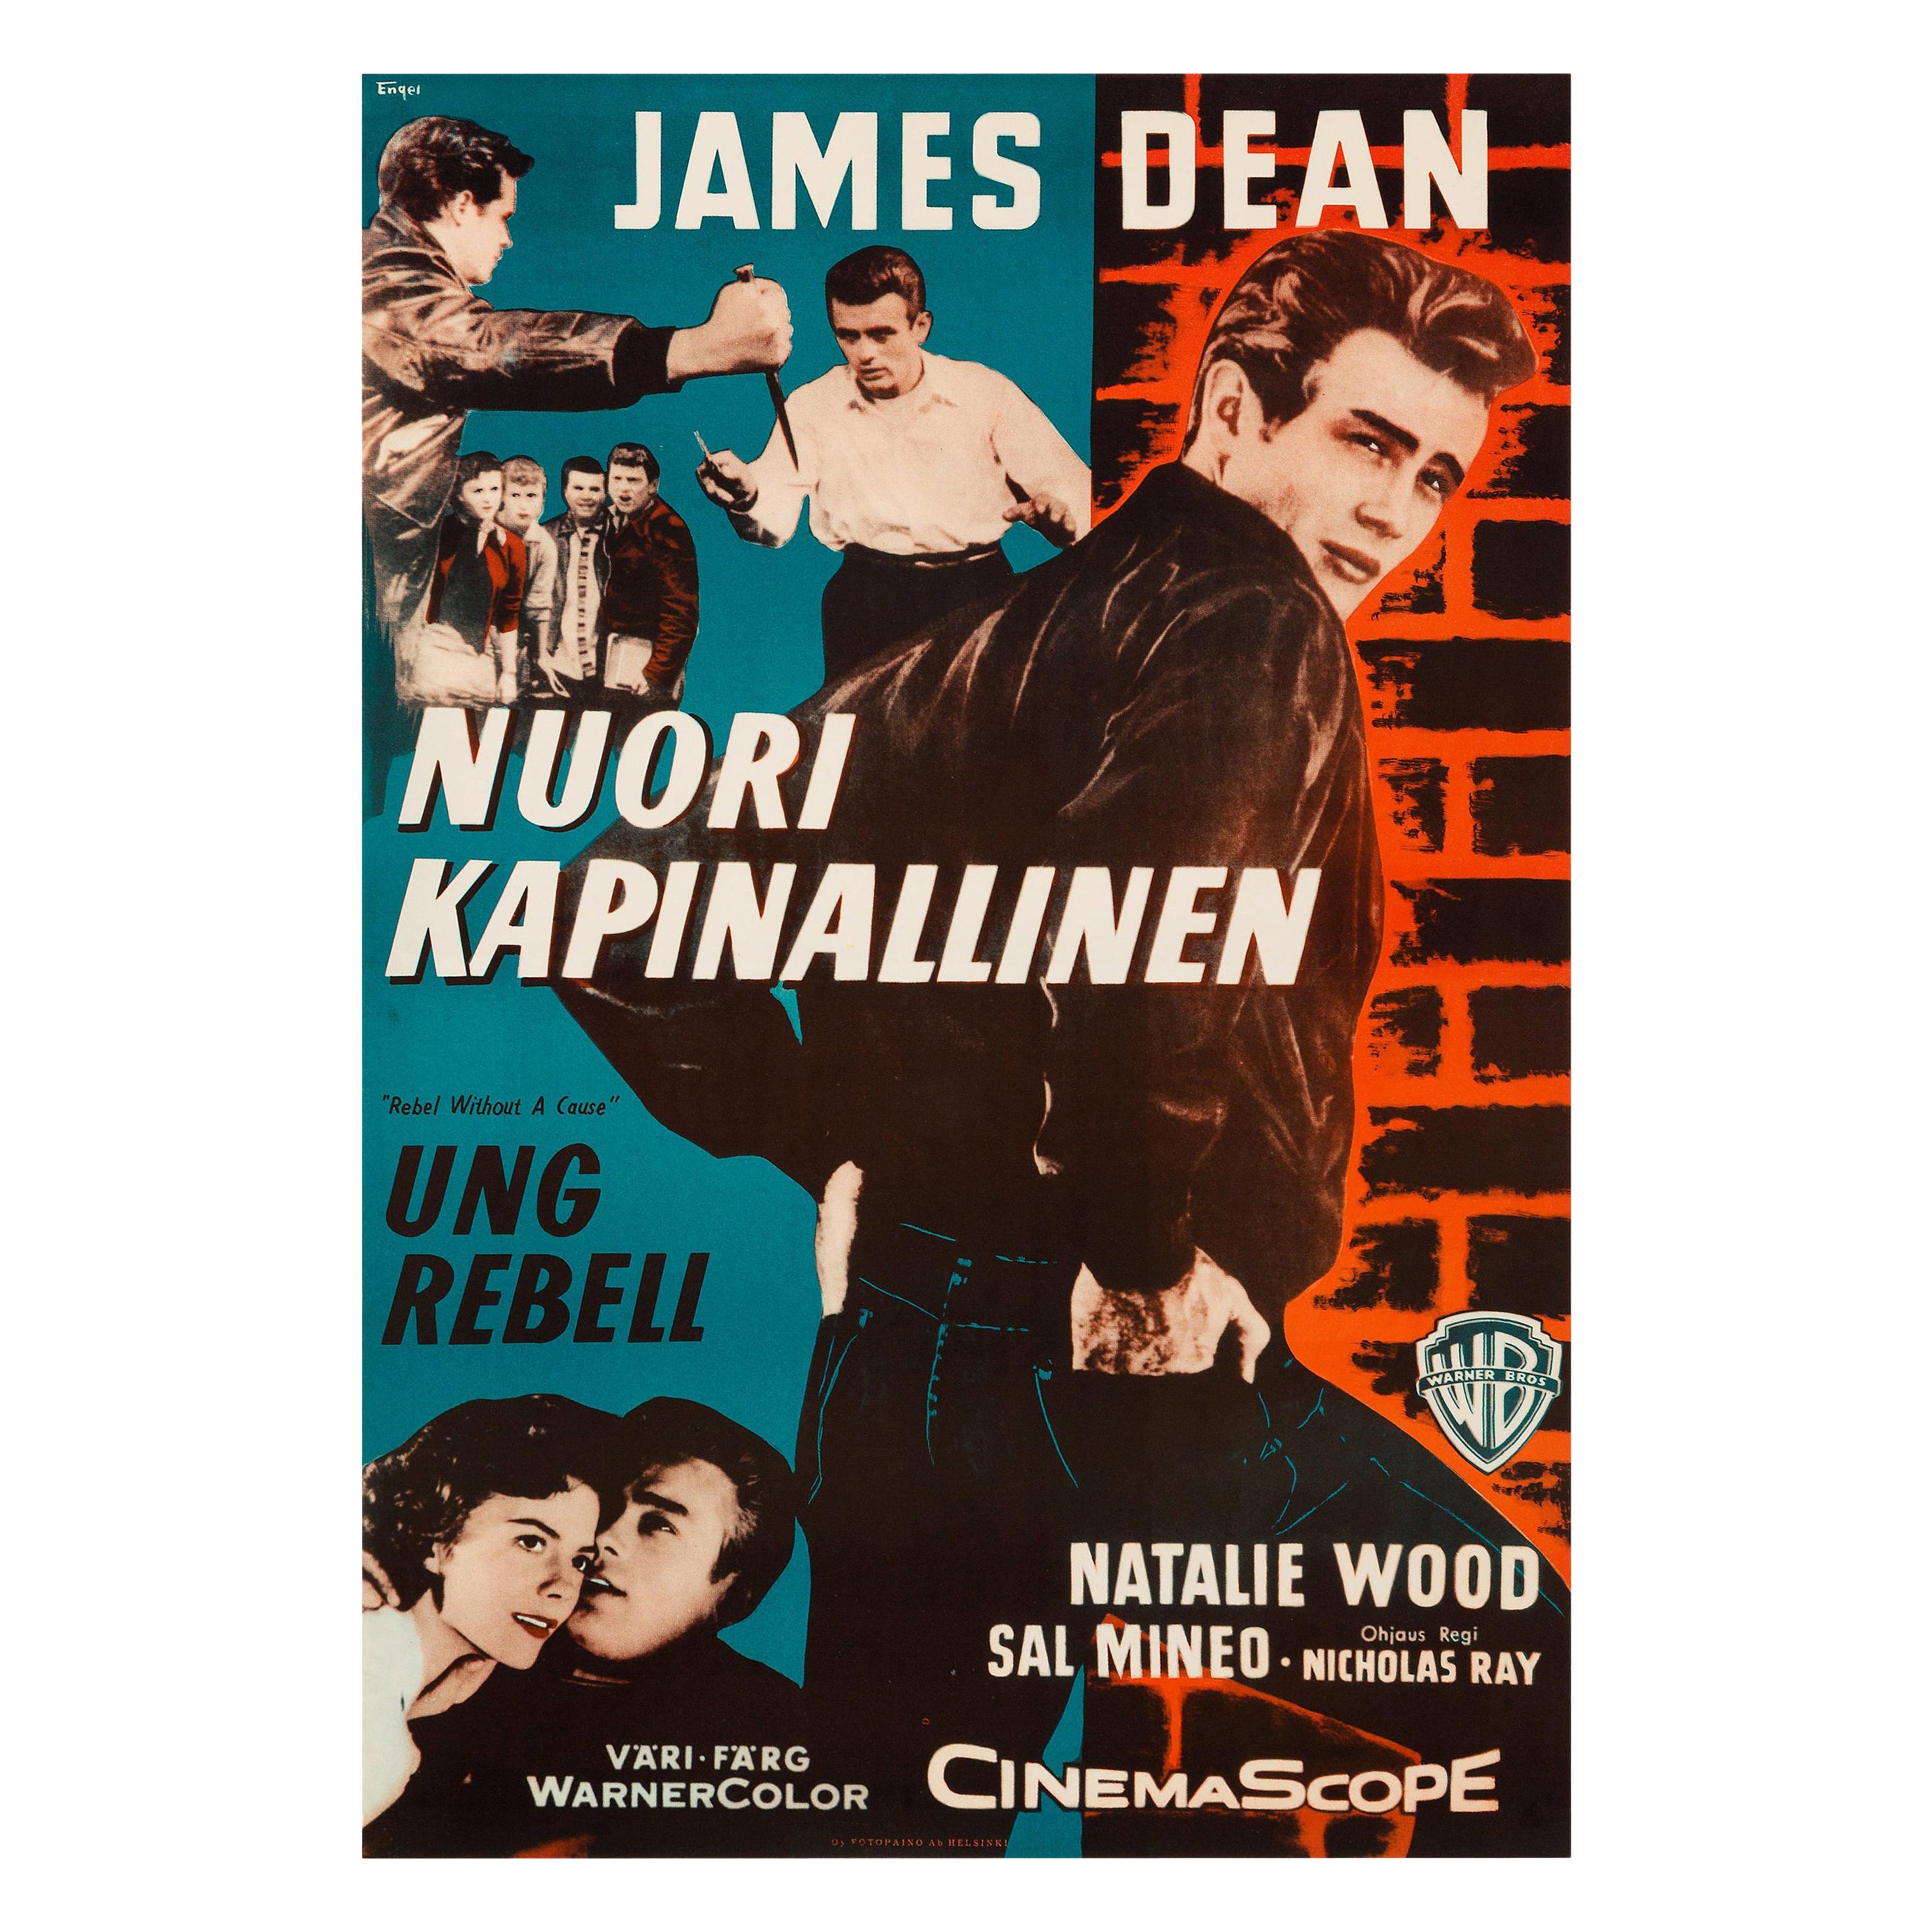 James Dean 'Rebel Without a Cause' Original Vintage Movie Poster, Finnish, 1956